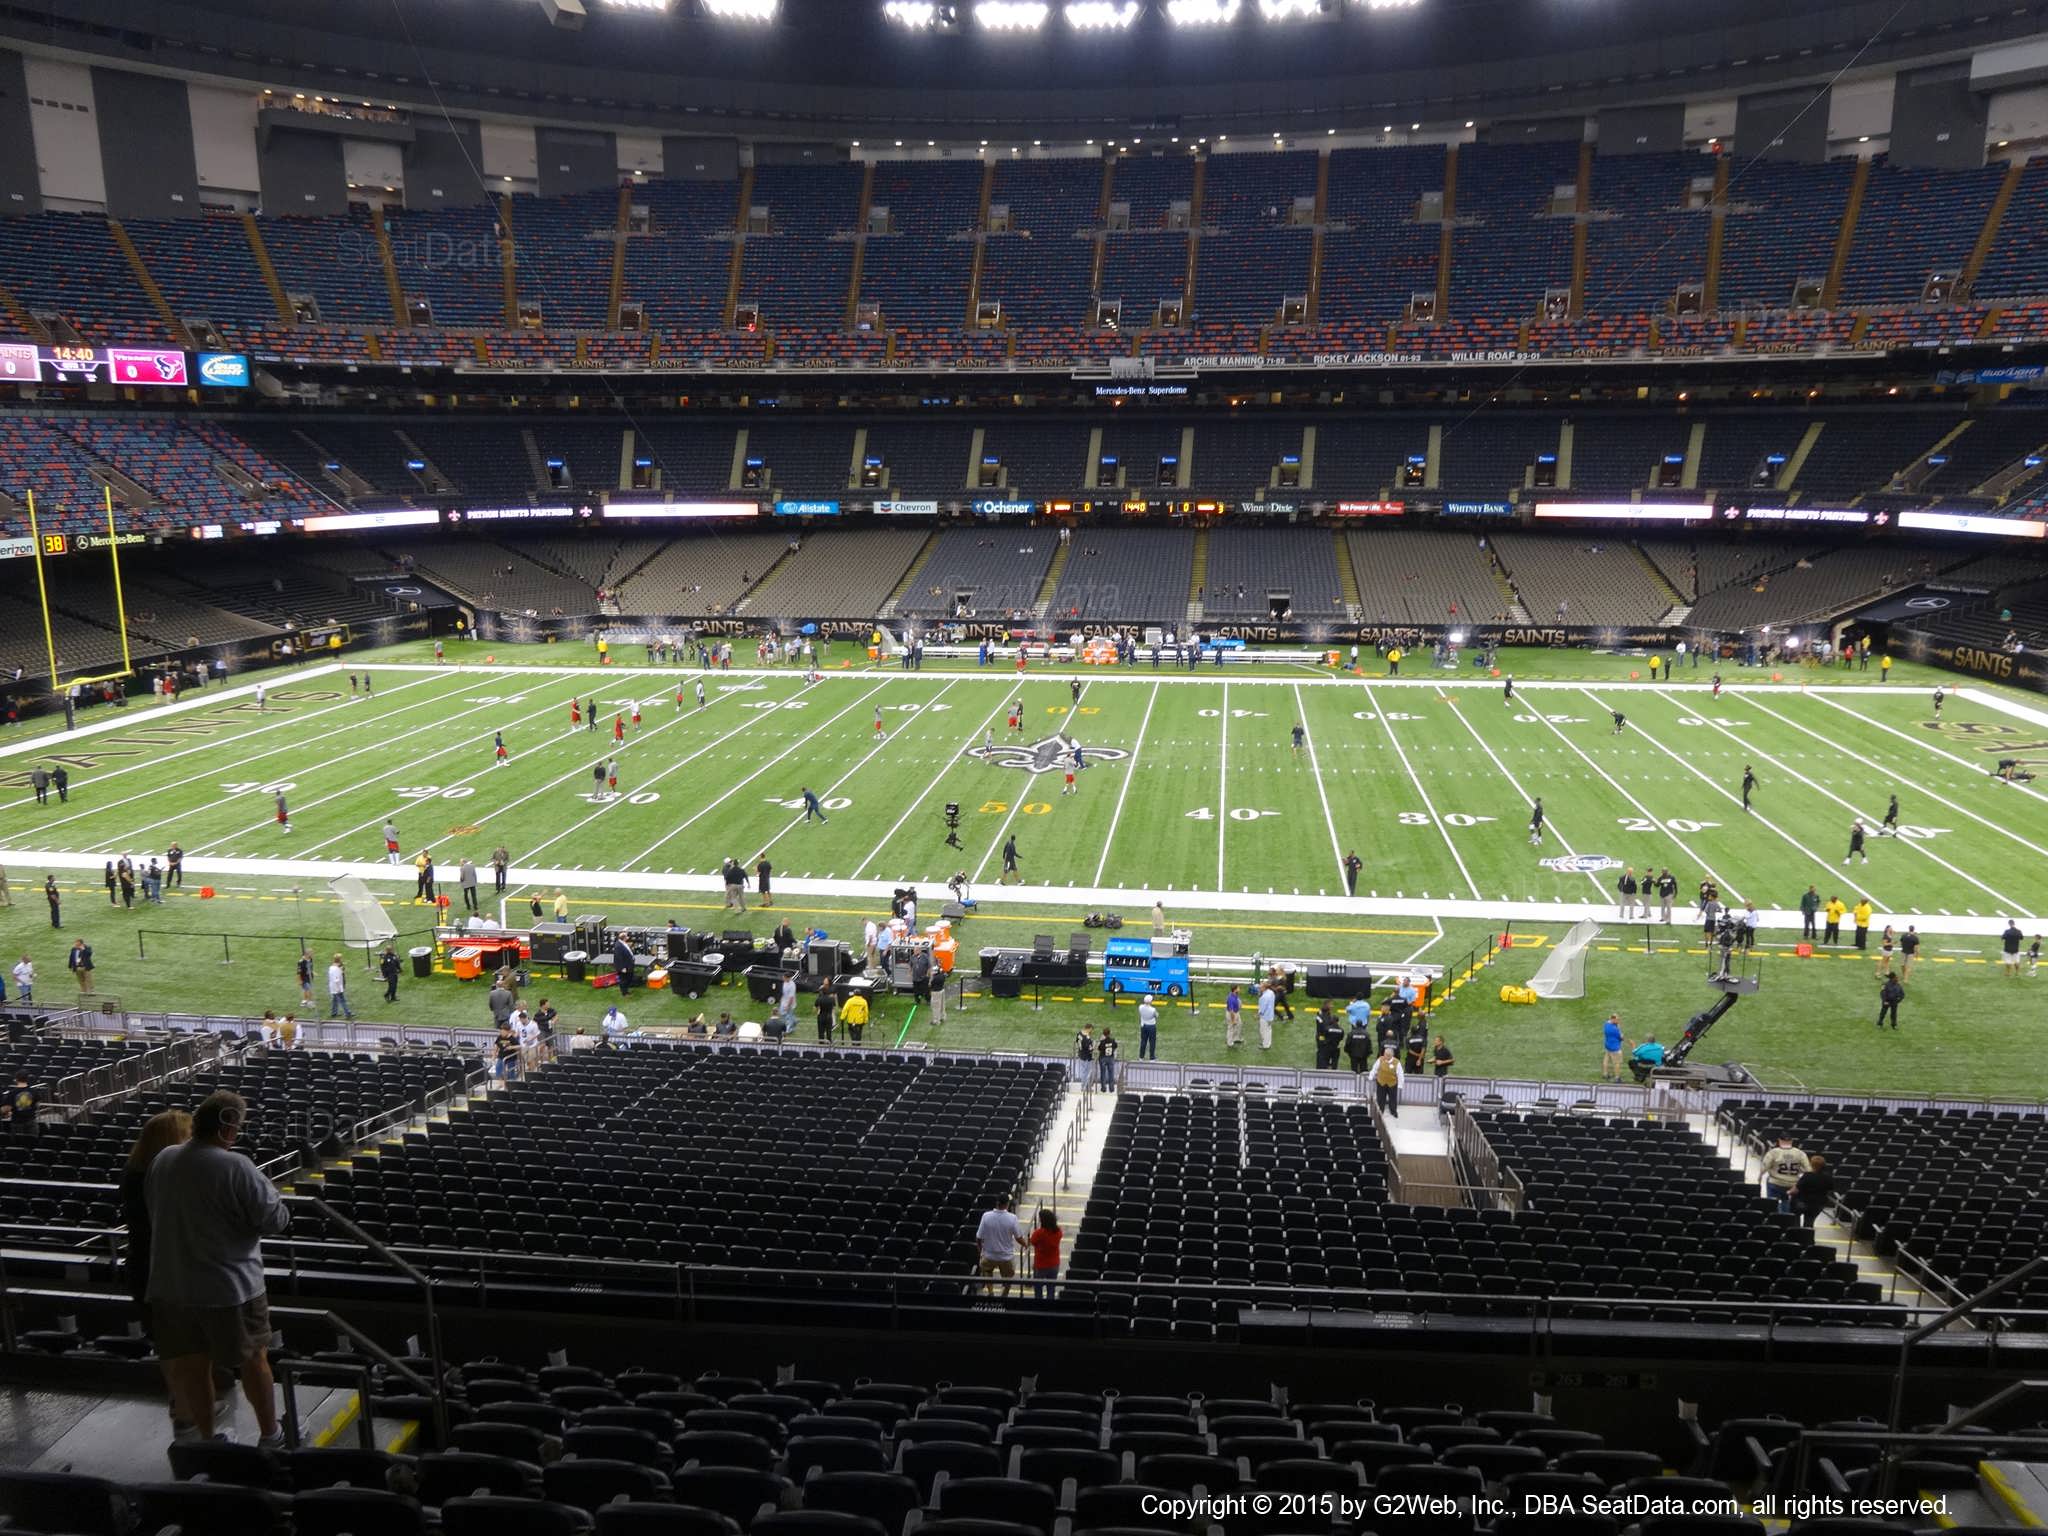 Seat view from section 335 at the Mercedes-Benz Superdome, home of the New Orleans Saints